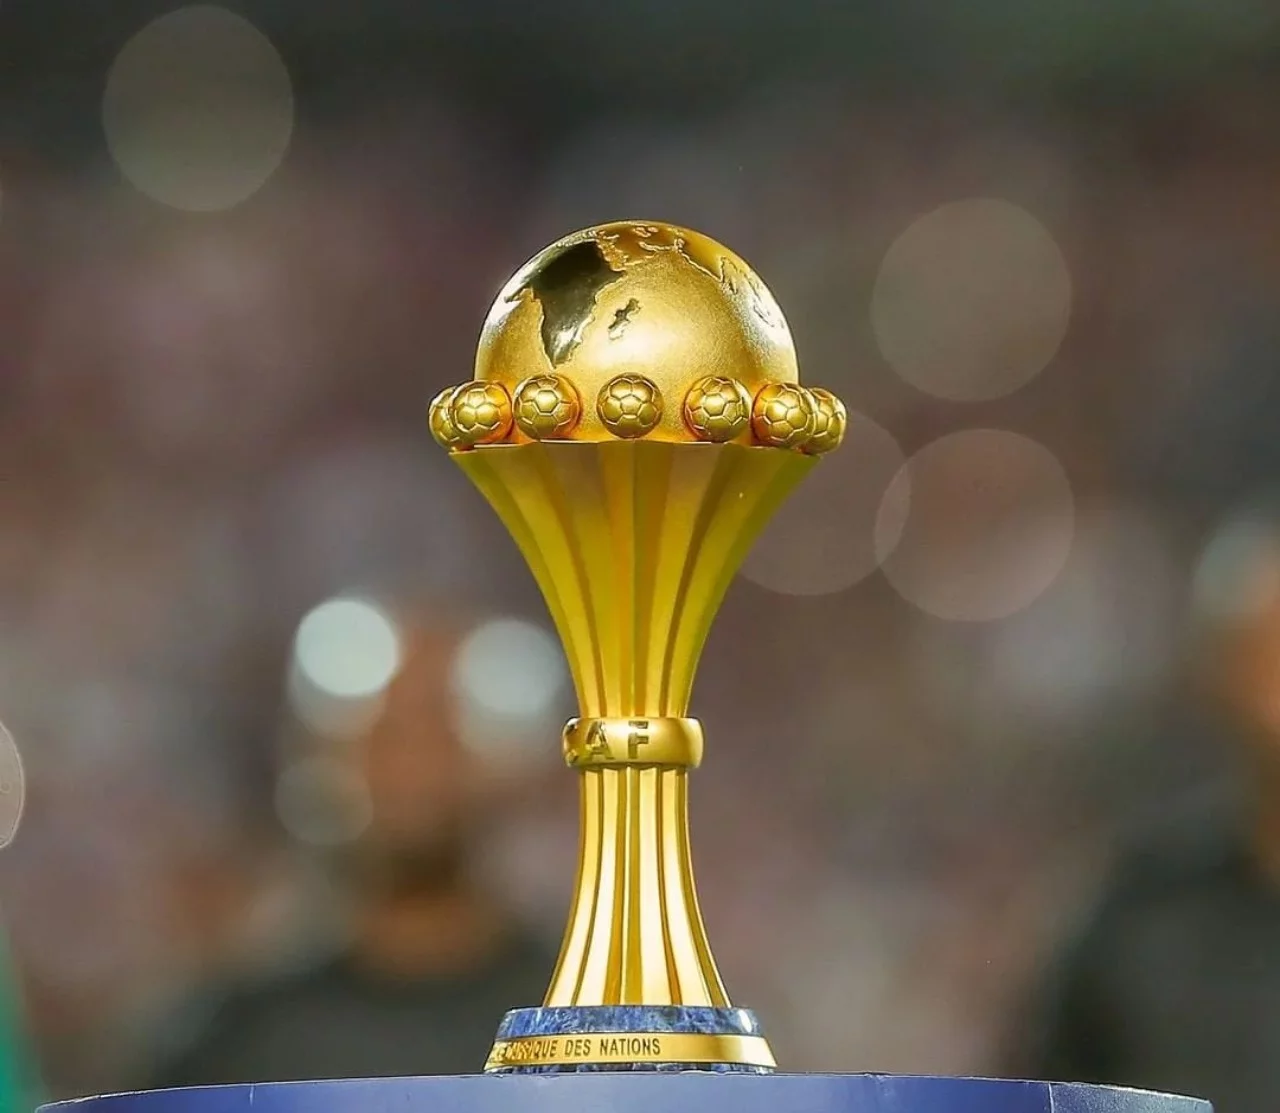  CAF rubbishes European media outlet report on AFCON